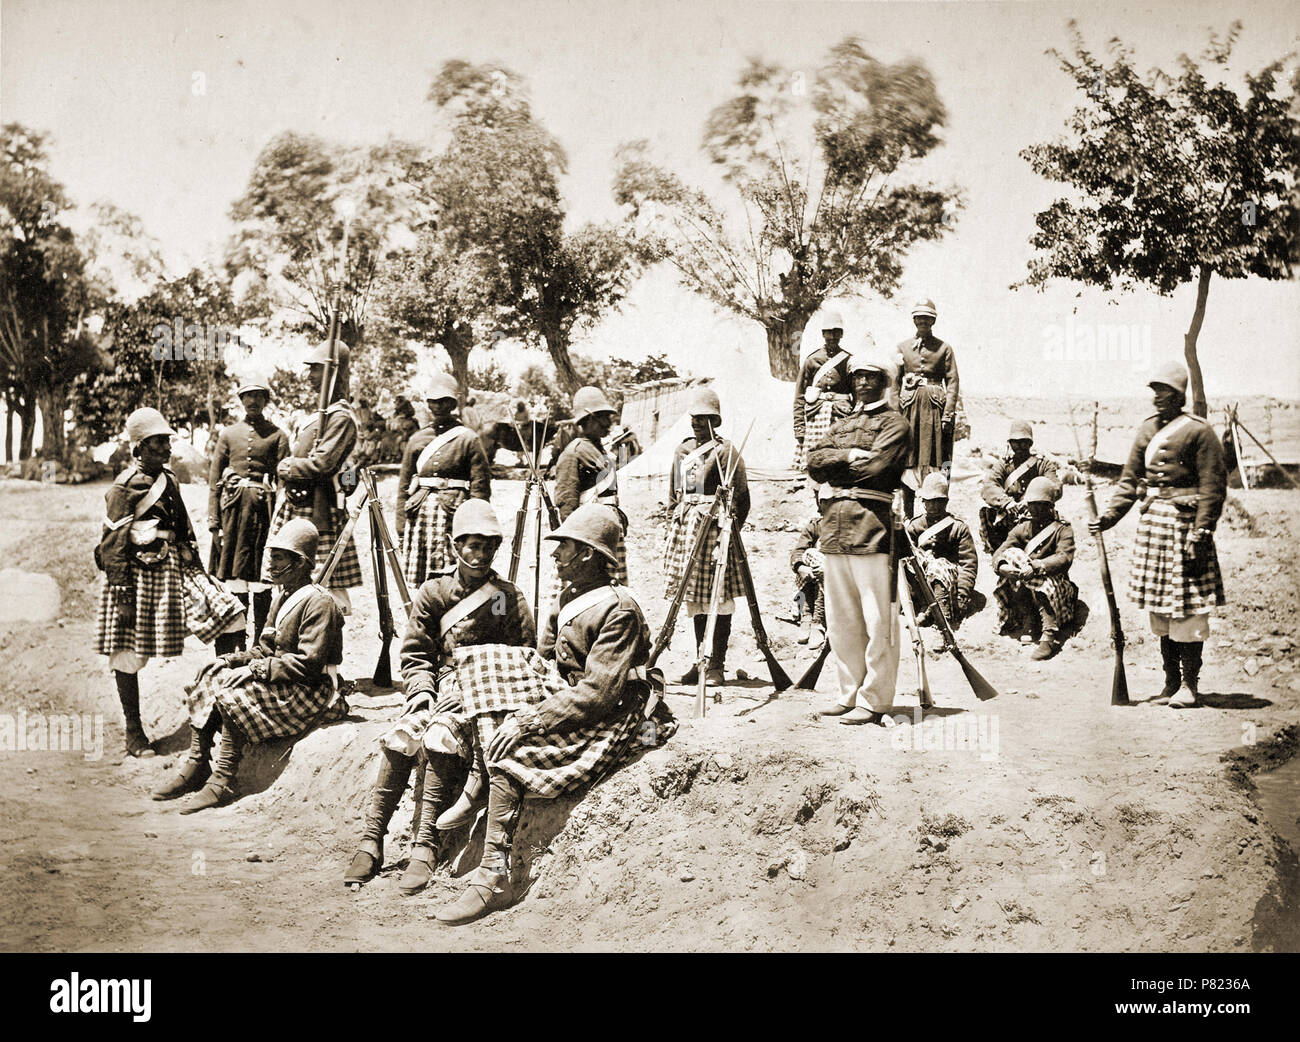 The Amir Yakub Khan's Highlanders [Gandamak]. Photograph of a group of soldiers of the 51st Light Infantry (Yorkshire Regiment) photographed by John Burke in May 1879, around the time that Britain and Afghanistan signed the Treaty of Gandamak. Burke accompanied British forces into Afghanistan in 1878 and covered the events of the Second Anglo-Afghan War (1878-80), becoming the first significant photographer of the country and its people in the process. The British, having taken the Khyber Pass and defeated the Amir Sher Ali's forces, wintered in Jalalabad, waiting for the new Amir Yakub Khan t Stock Photo